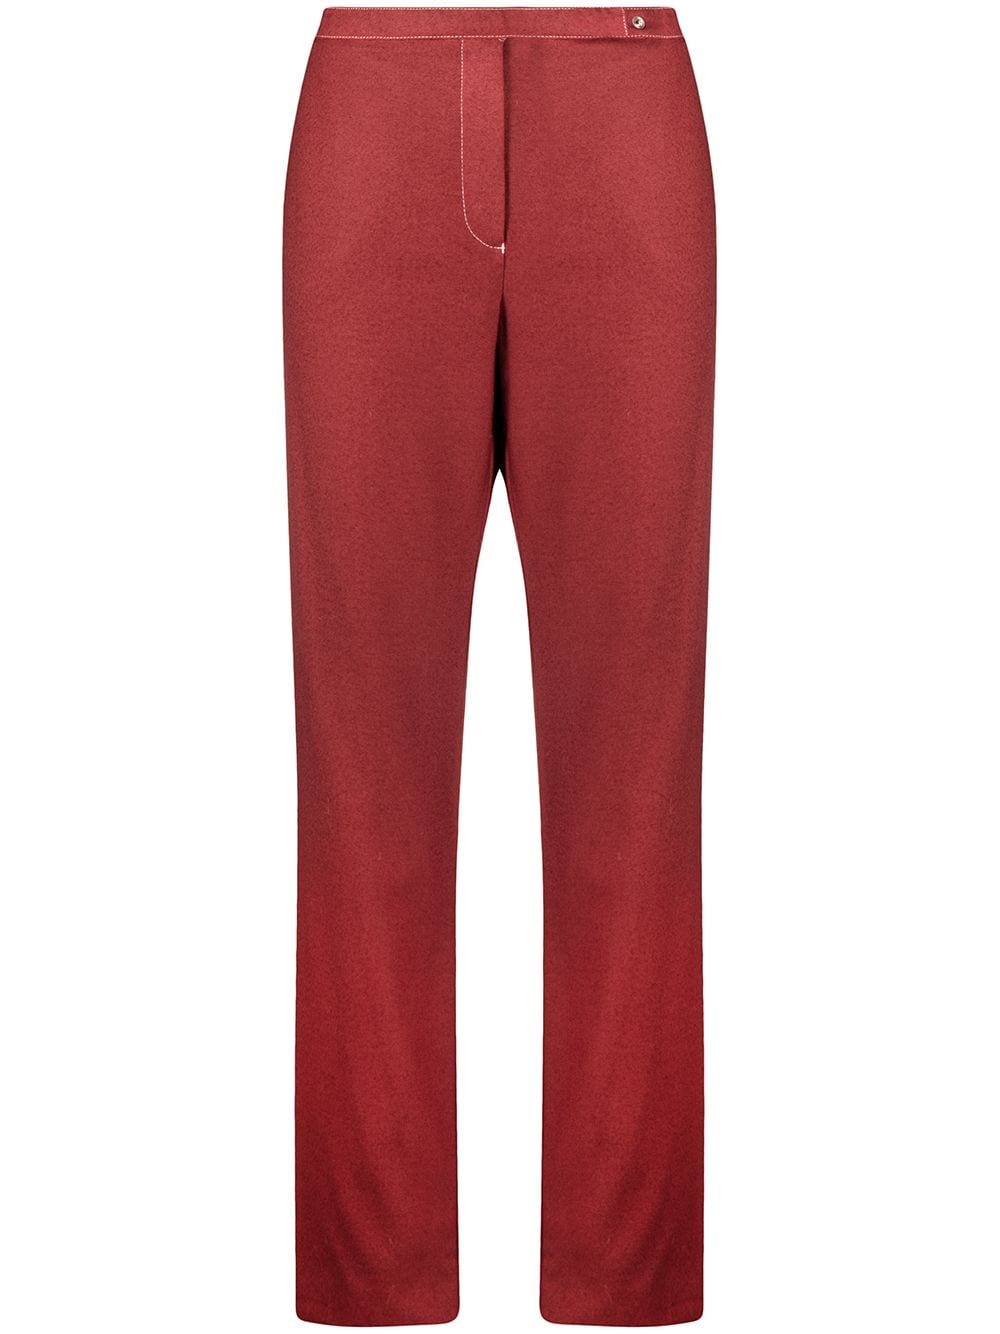 CHANEL Pre-Owned 2005 high-waisted flared trousers